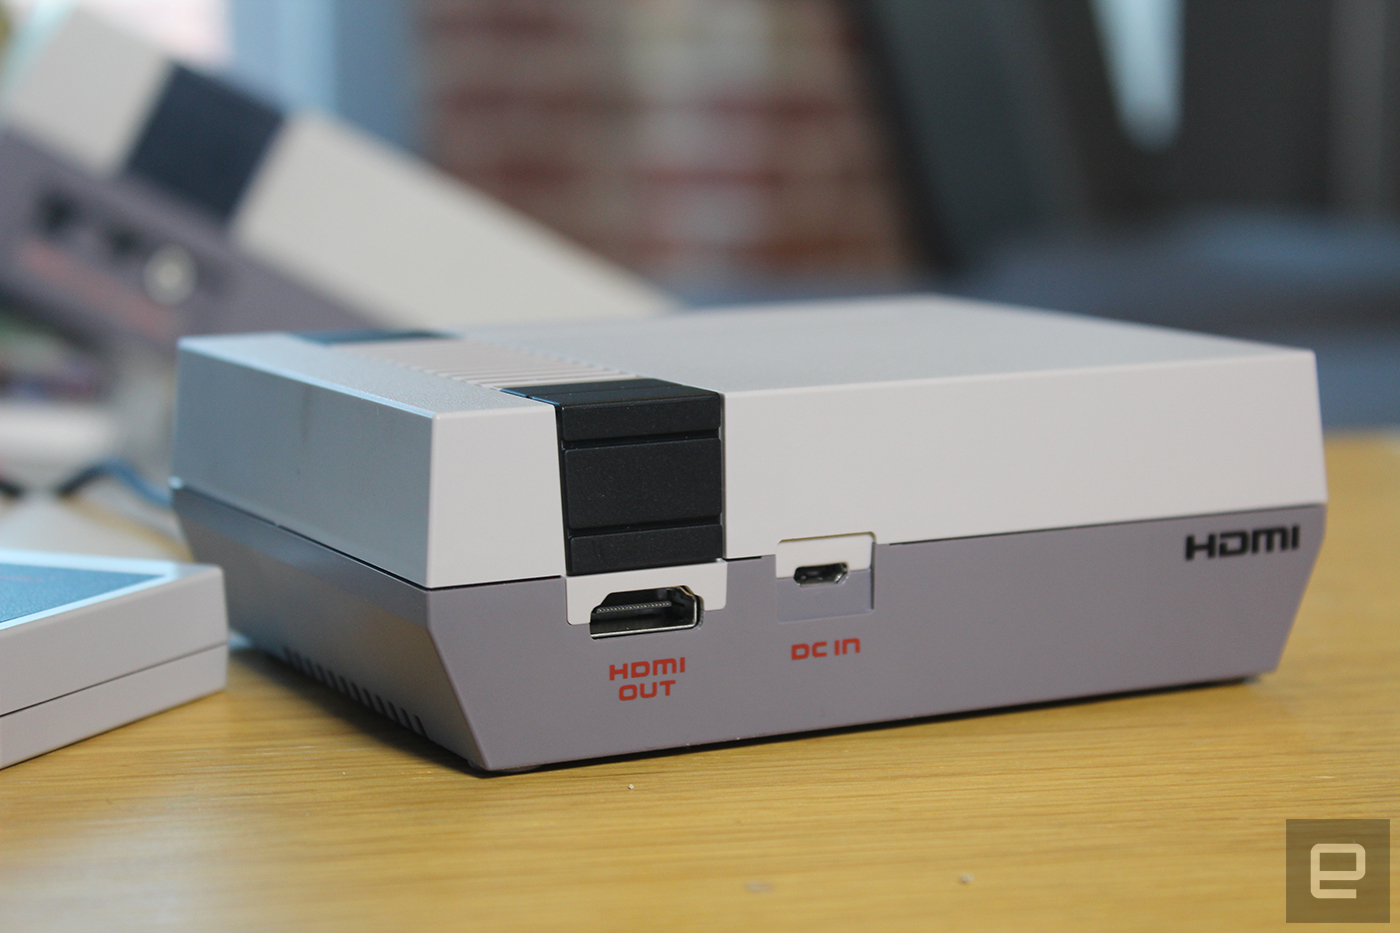 nes mini hookup an dating story